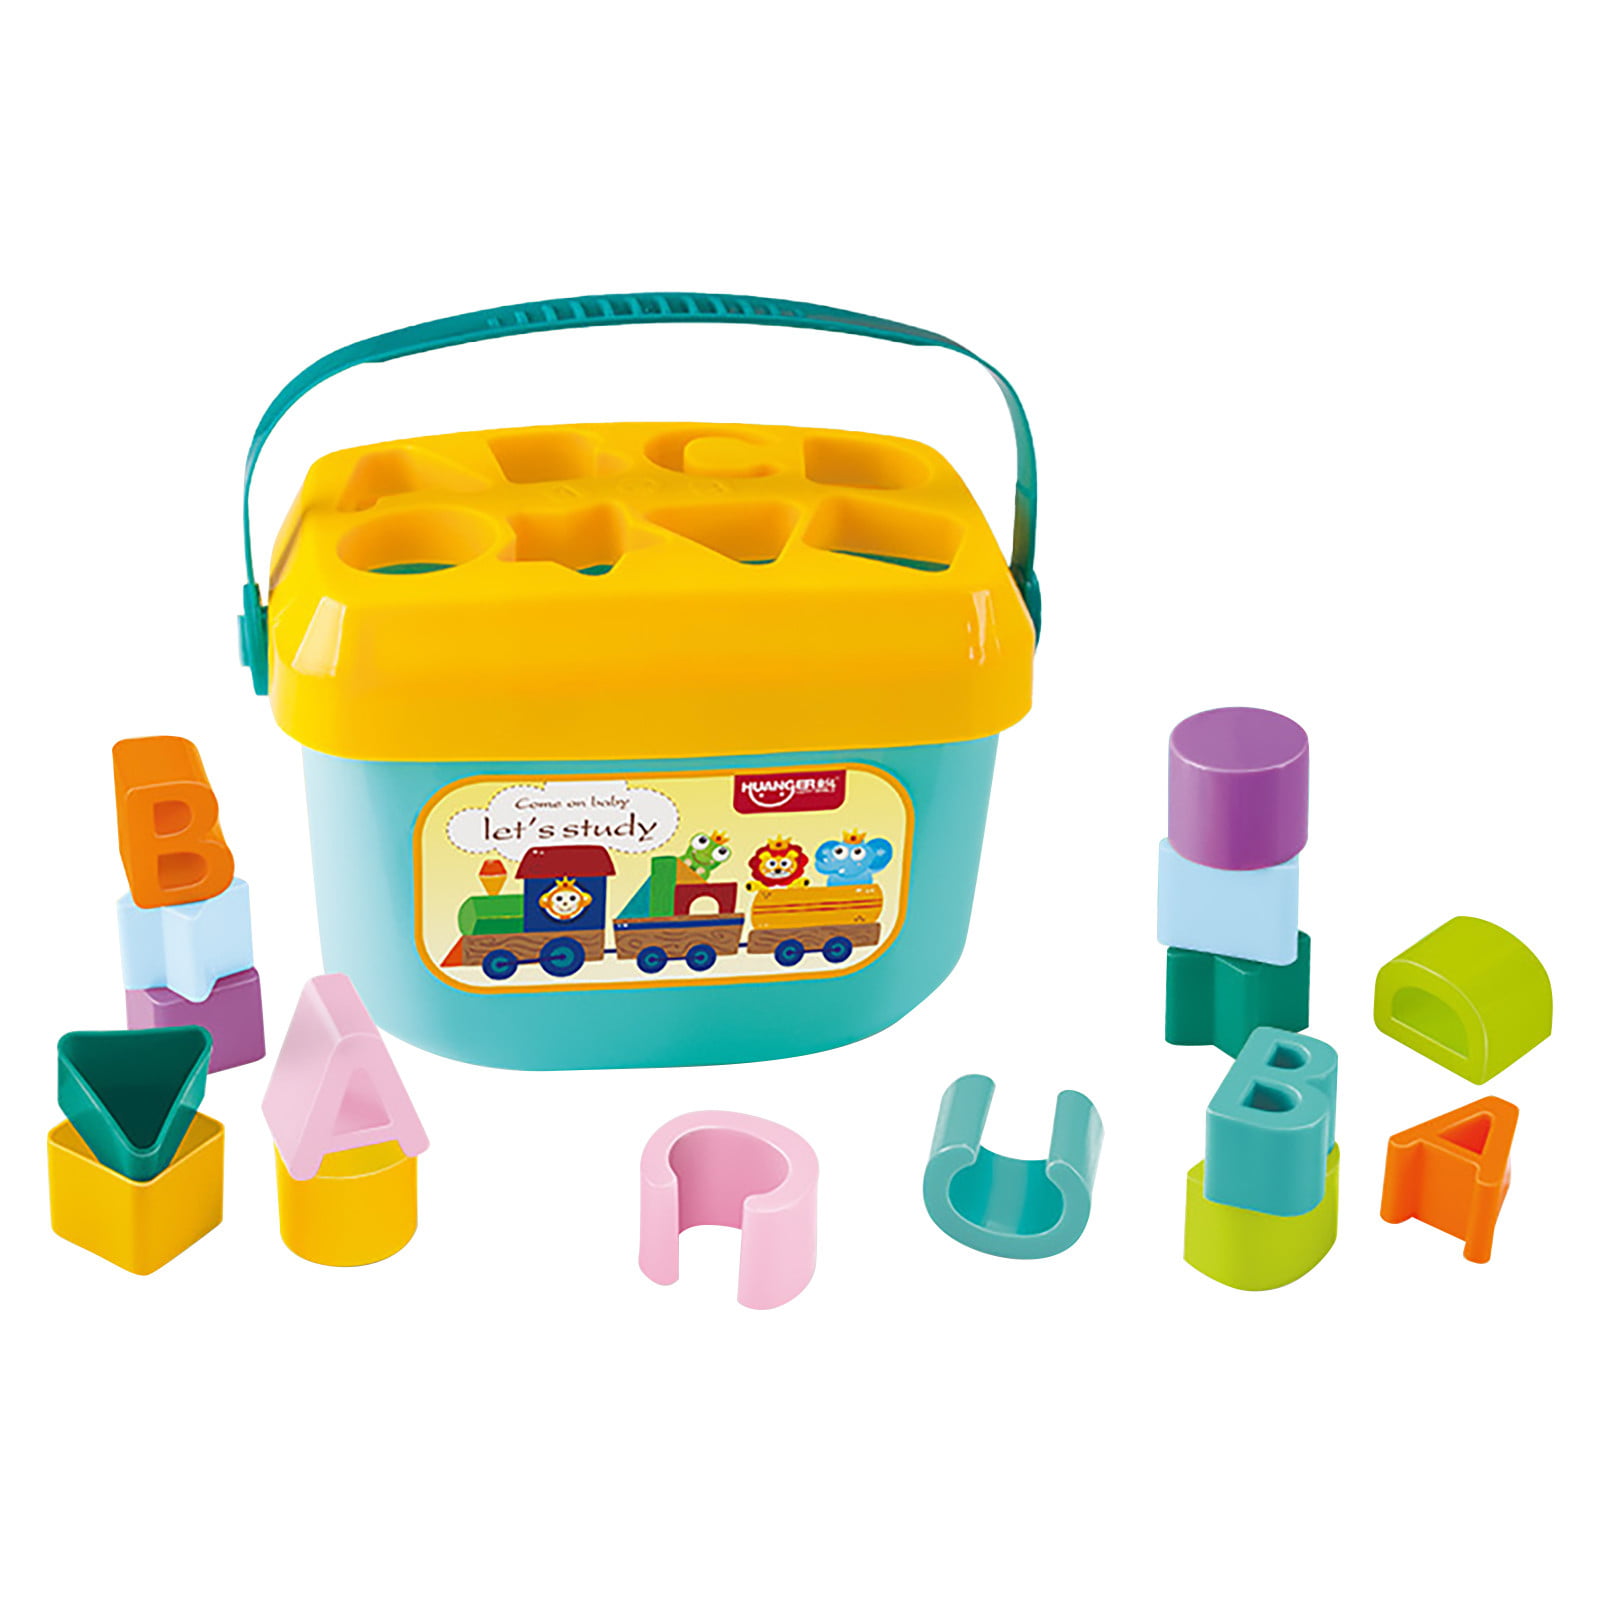 Playkidz Shape Sorter Baby and Toddler Toy, ABC and Shape Pieces ...